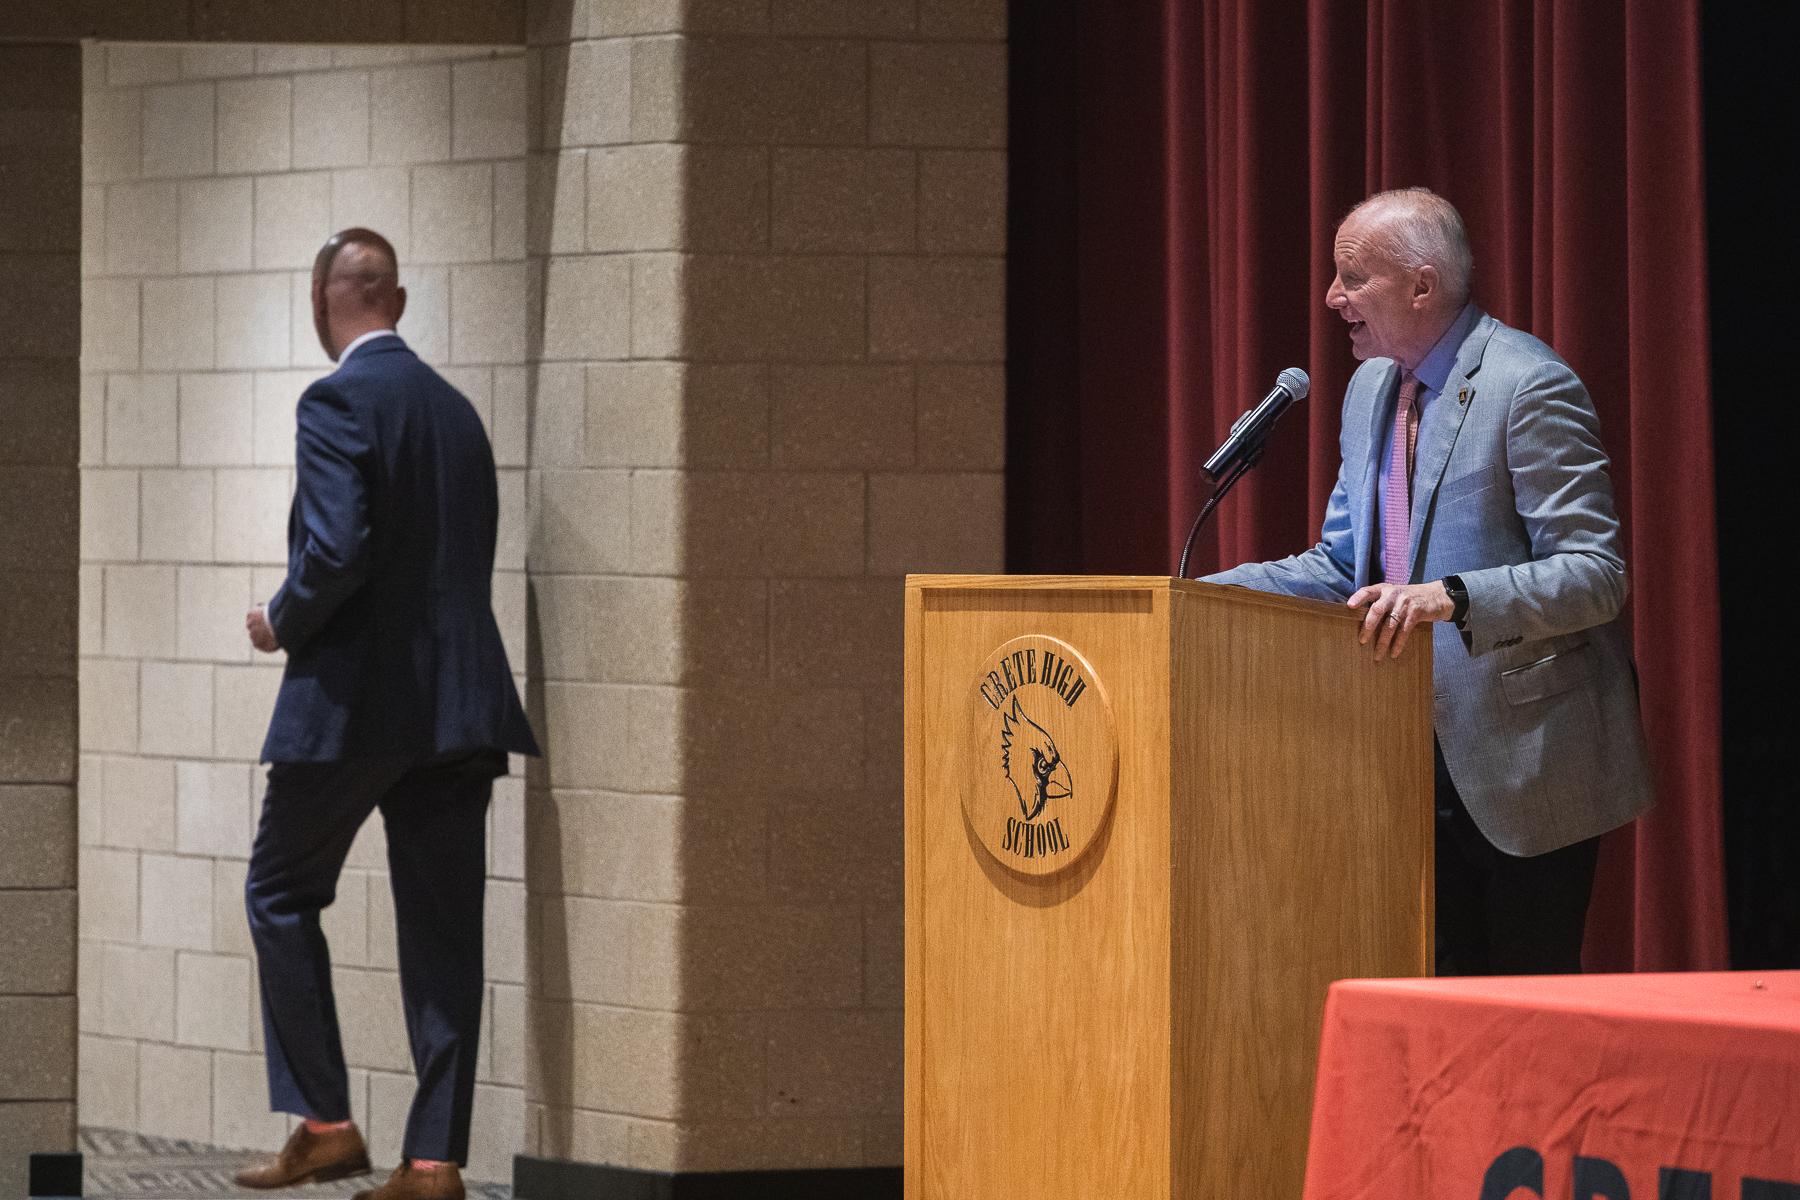 Doane President Dr. Roger Hughes addresses employees of Crete Public Schools behind a wooden podium with the Crete High School cardinal head logo. CPS Superintendent Dr. Josh McDowell walks offstage through a doorway. Behind Hughes is a red curtain. 